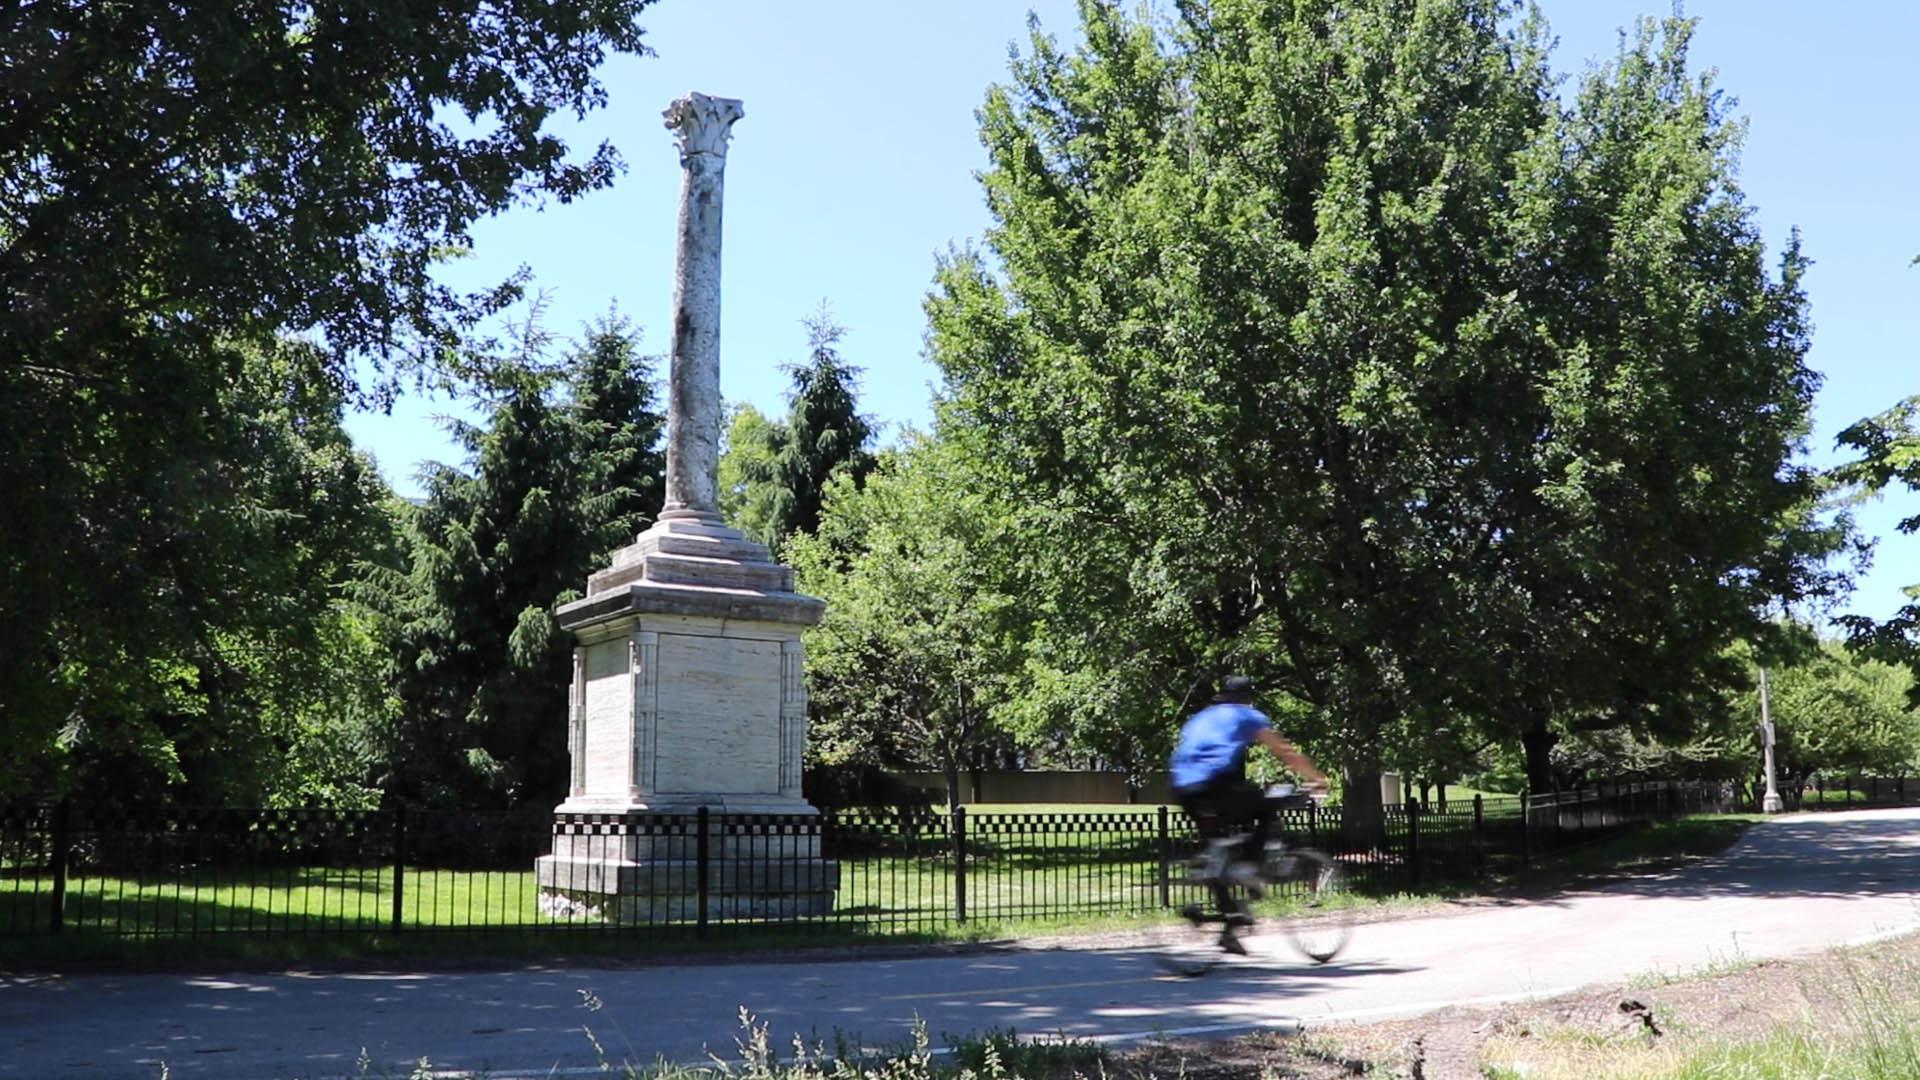 A cyclist on the lakefront trail rides past Balbo Monument, a 1933 monument gifted to the city by Italian fascist dictator Benito Mussolini. (Evan Garcia / WTTW News)